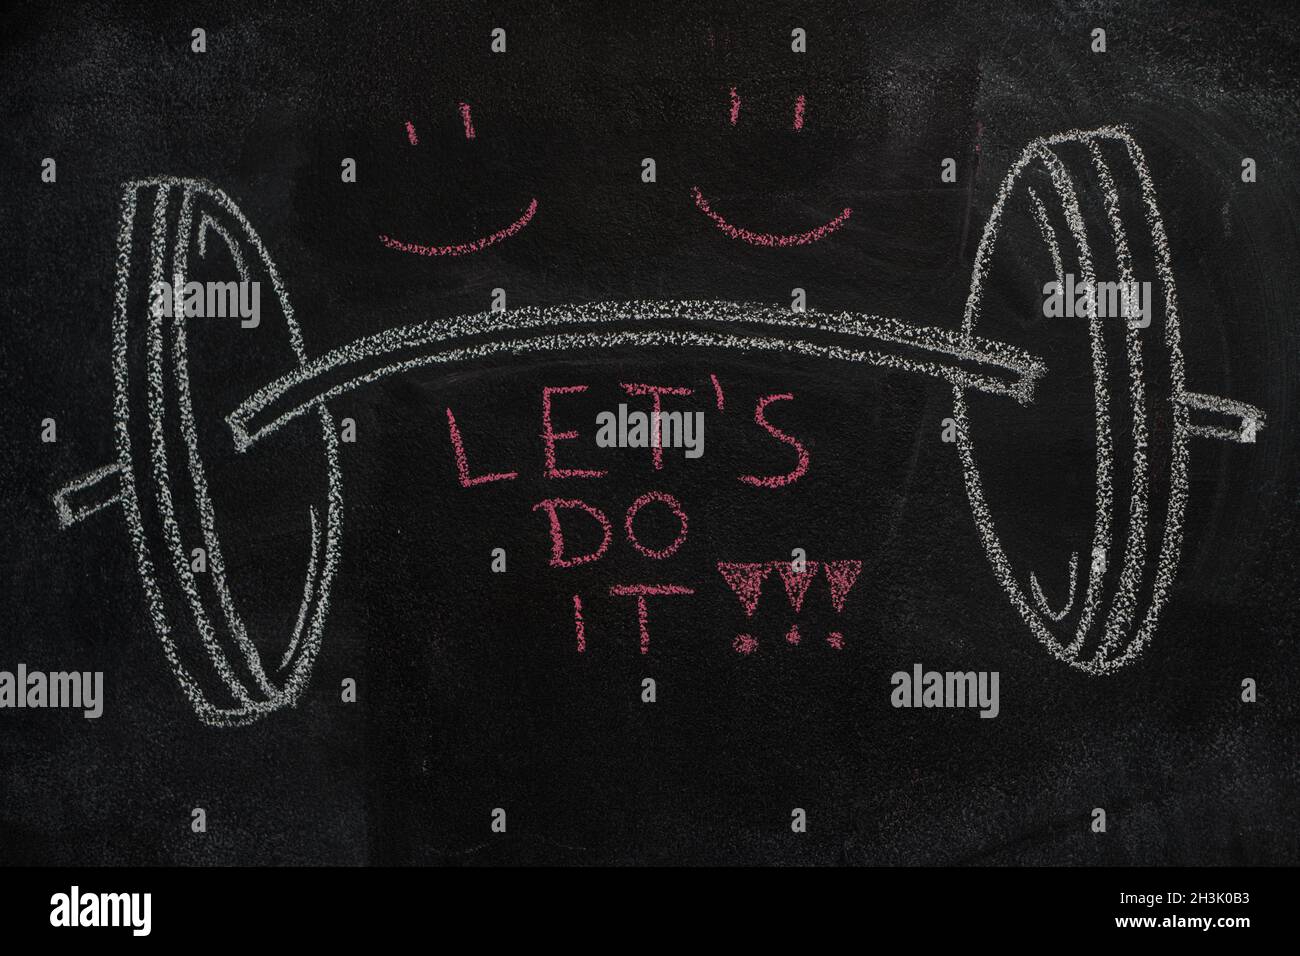 Barbell and Let's do it text on black chalkboard Stock Photo